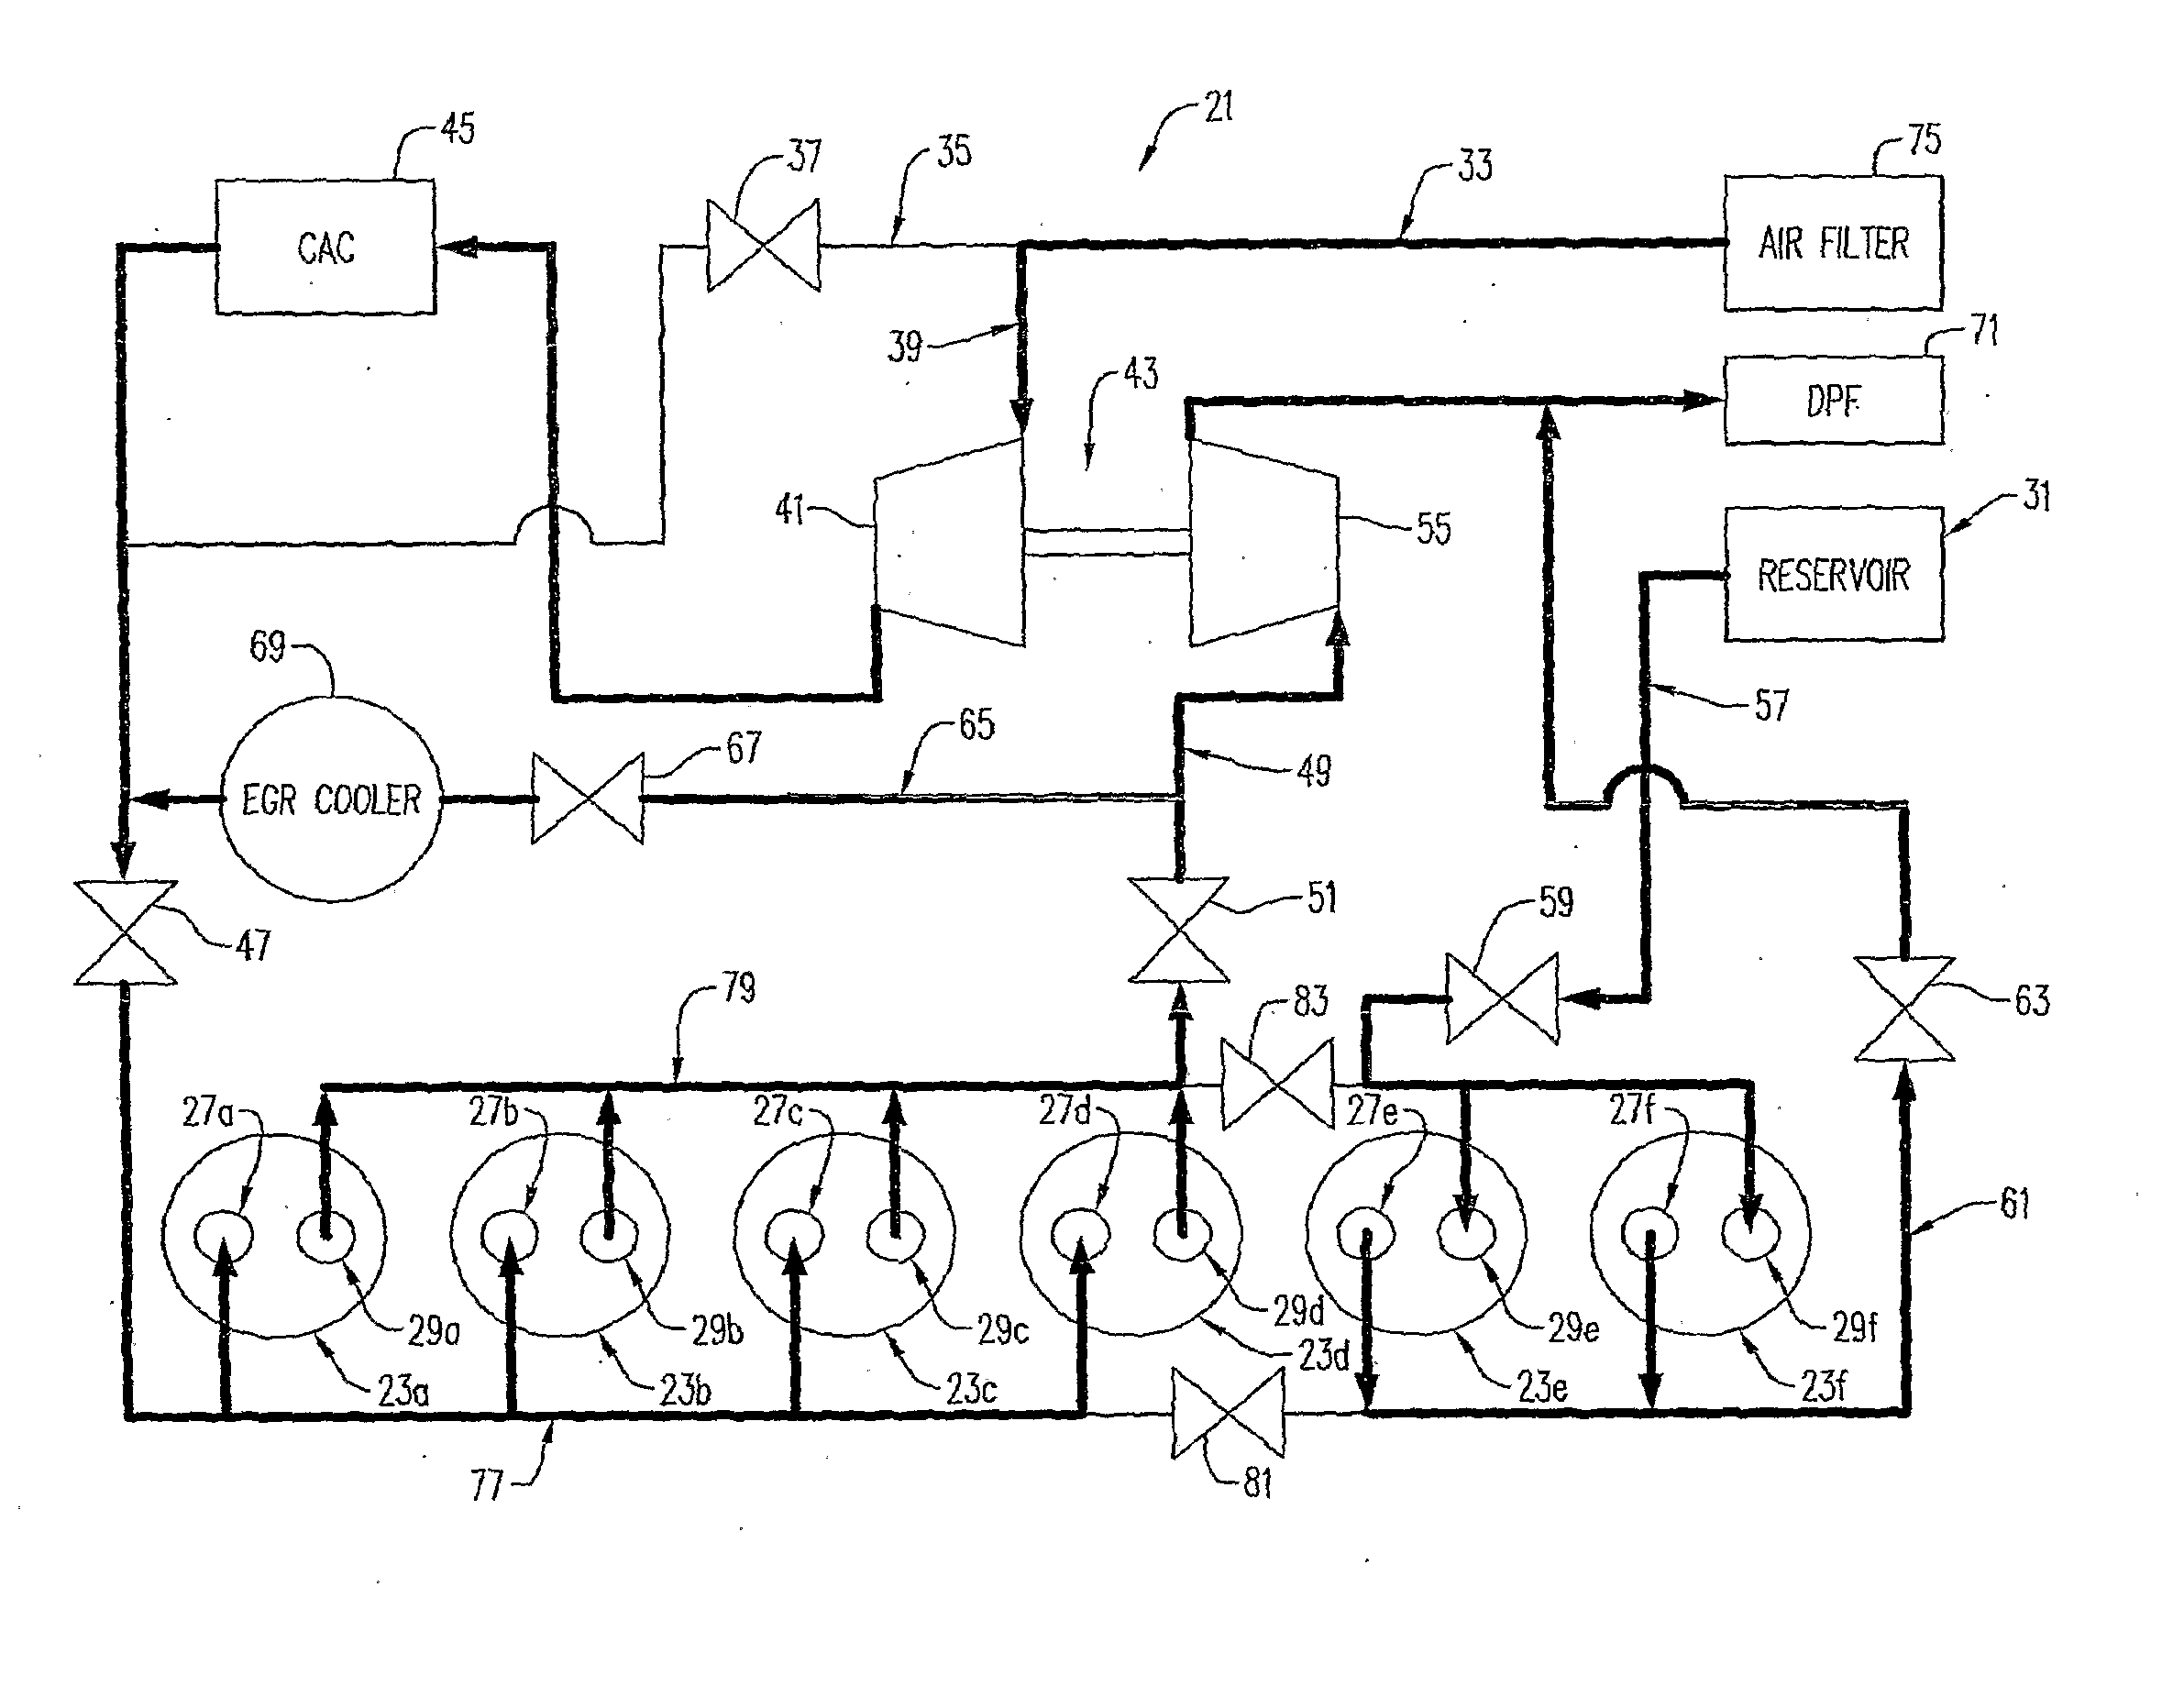 Hybrid internal combustion engine and air motor system and method